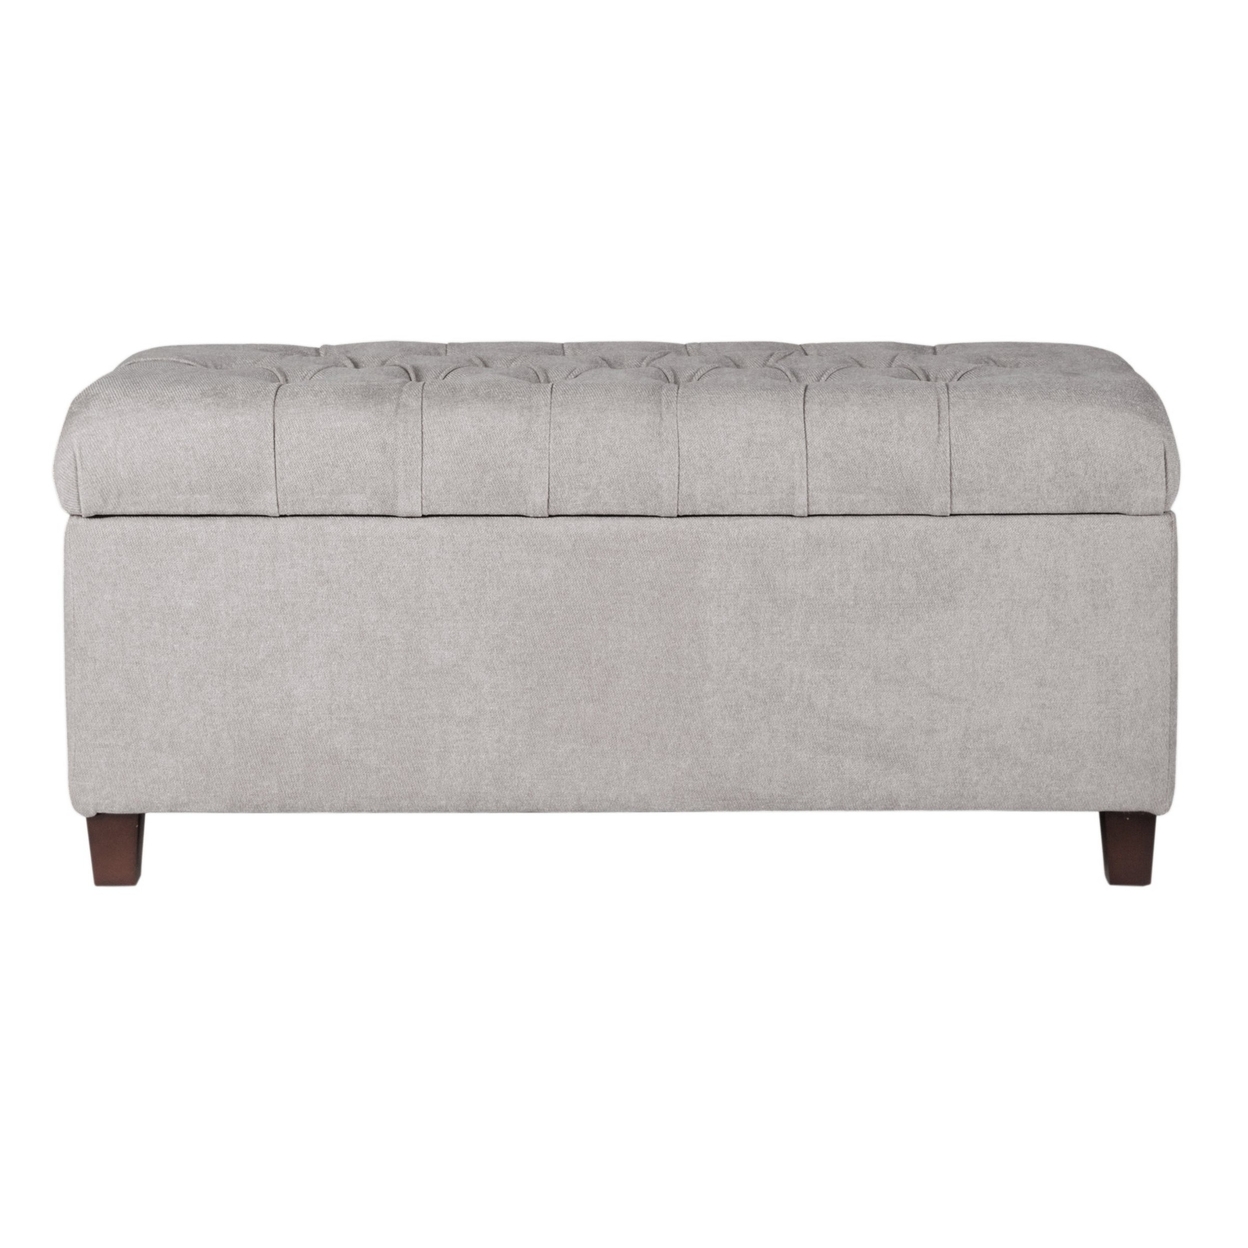 Fabric Upholstered Button Tufted Wooden Bench With Hinged Storage, Gray And Brown- Saltoro Sherpi